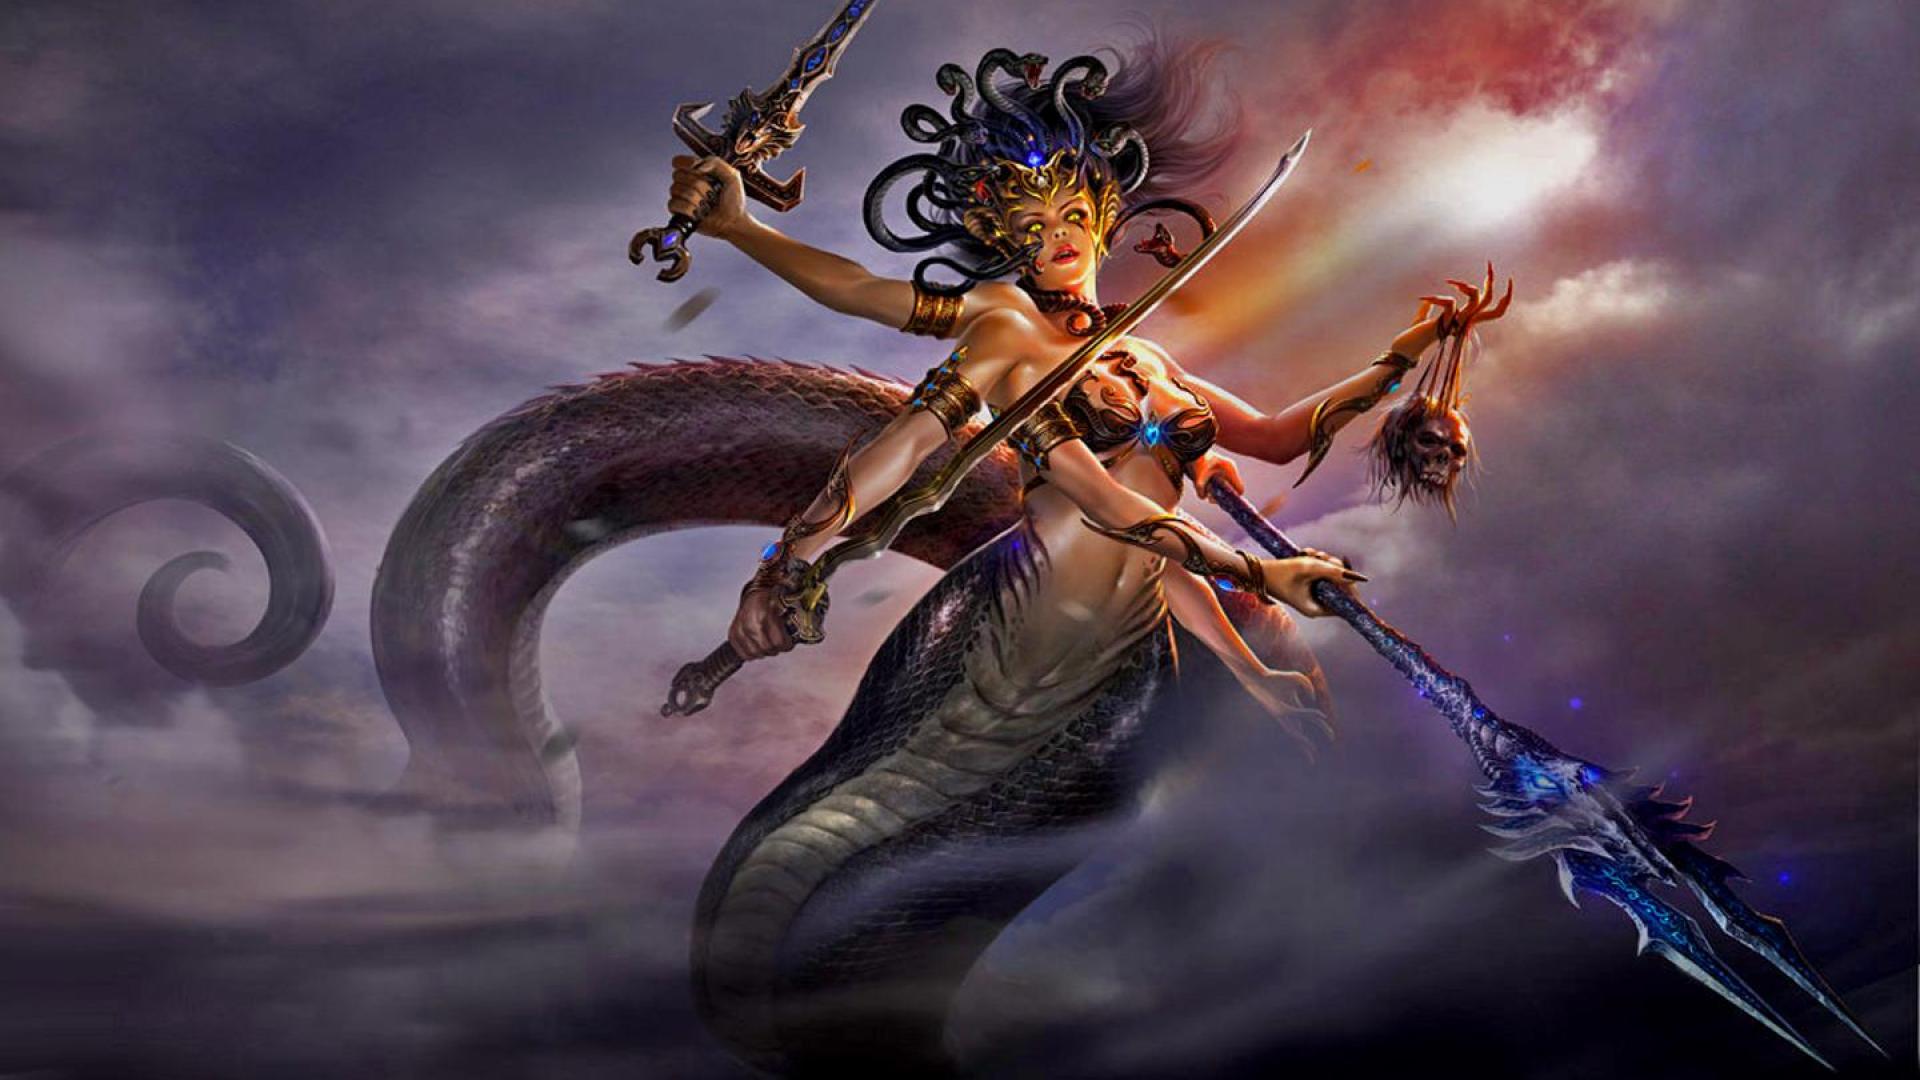 Large Medusa Backgrounds GsFDcY WP Collection